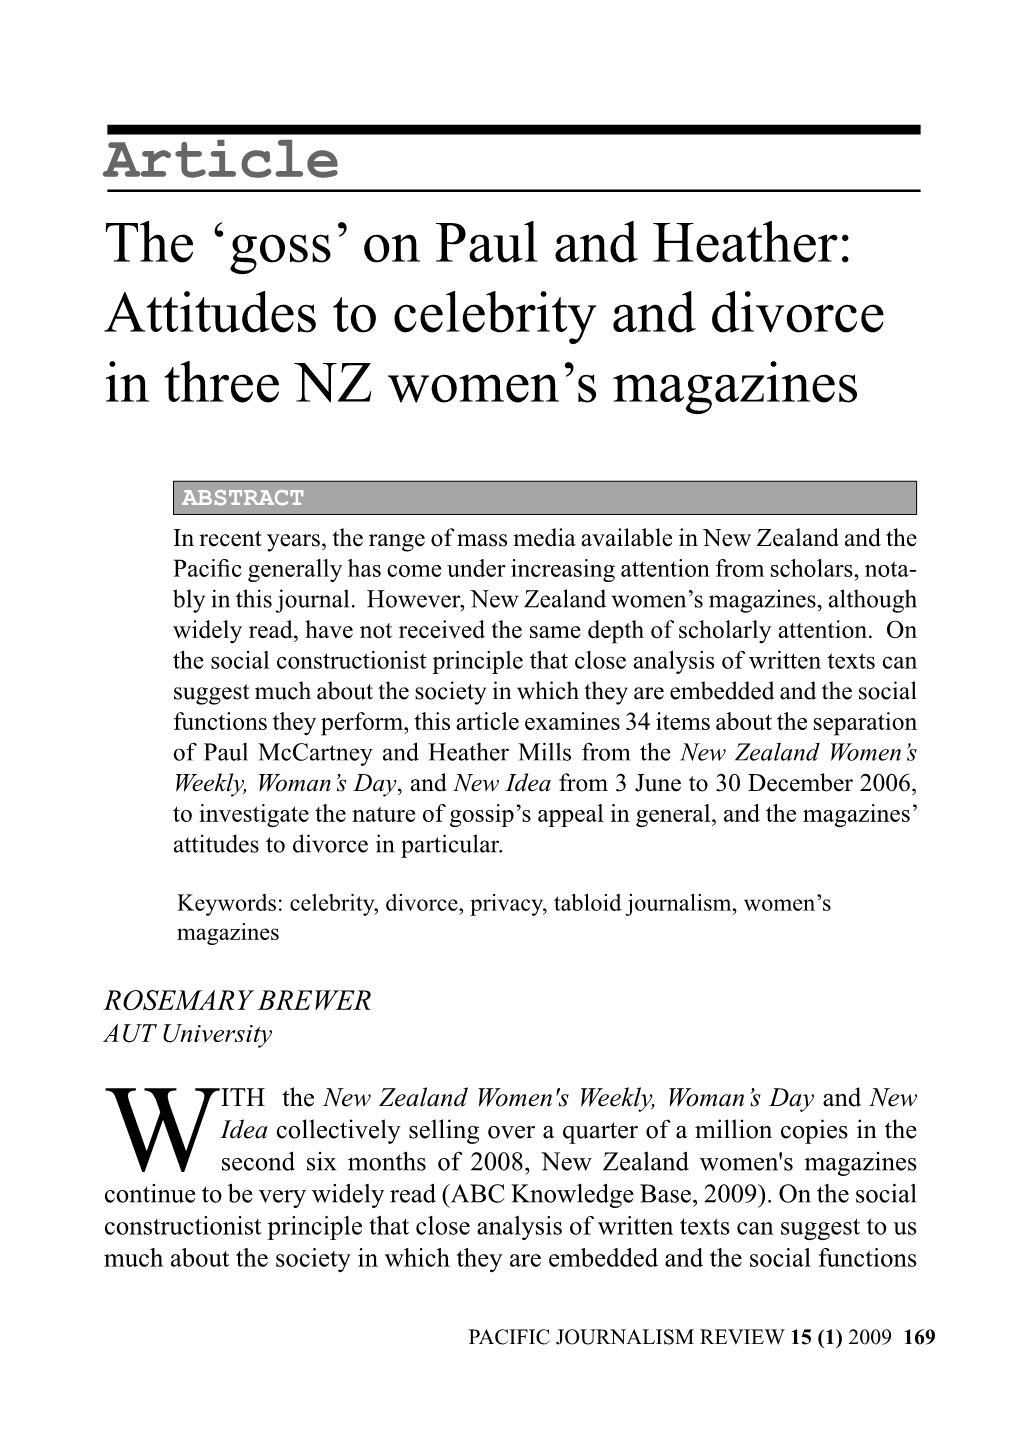 Article the 'Goss' on Paul and Heather: Attitudes to Celebrity and Divorce In